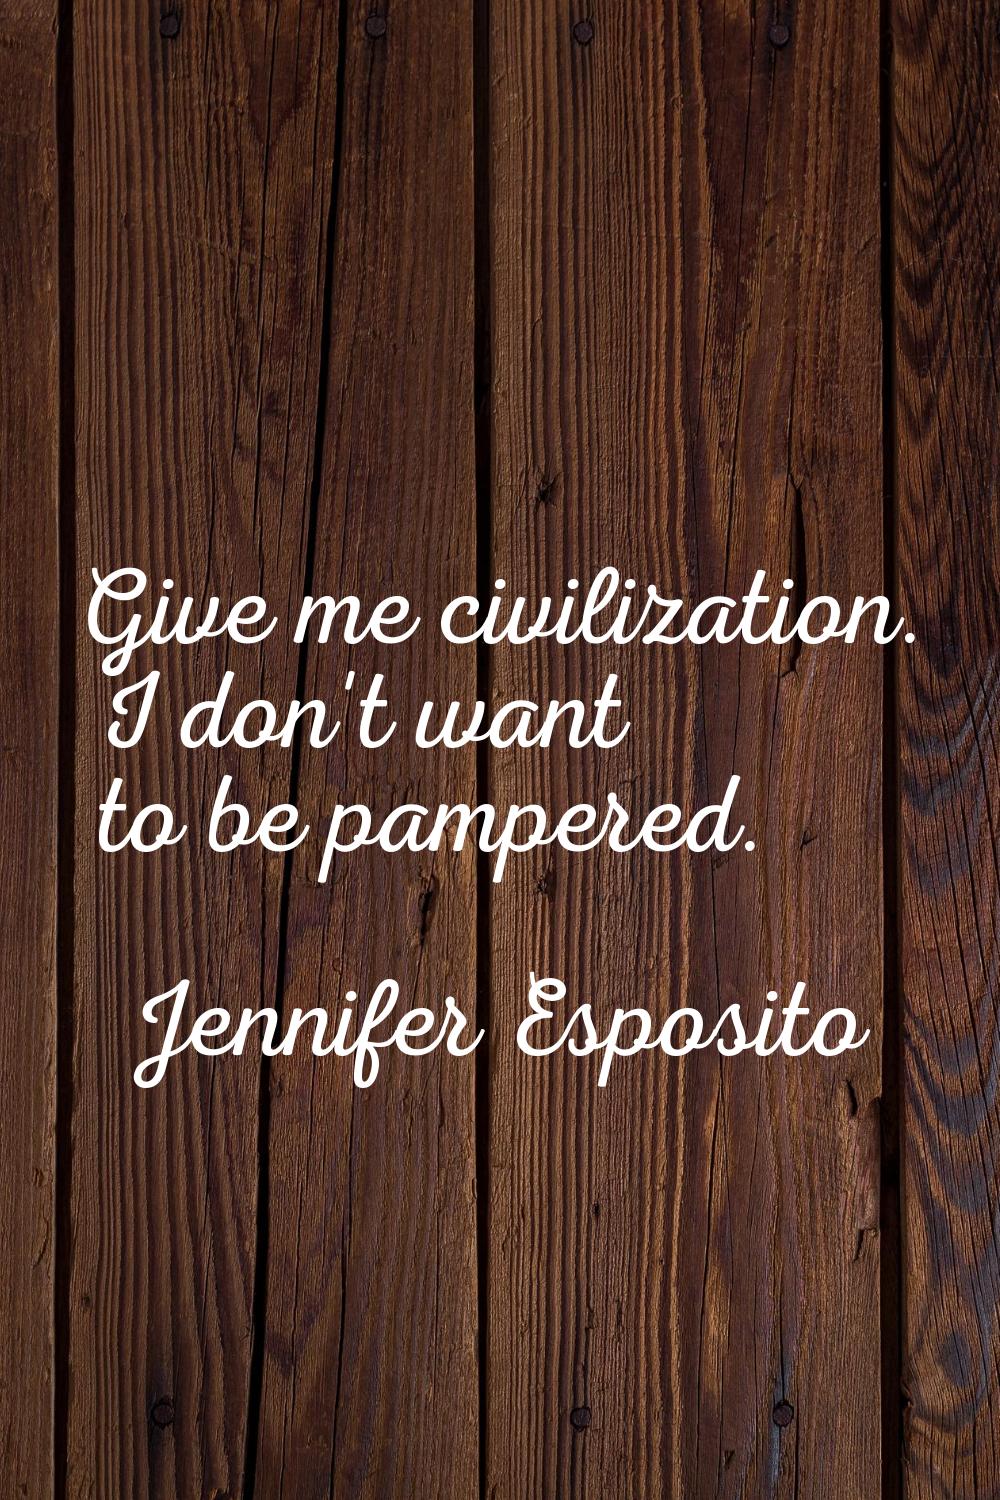 Give me civilization. I don't want to be pampered.